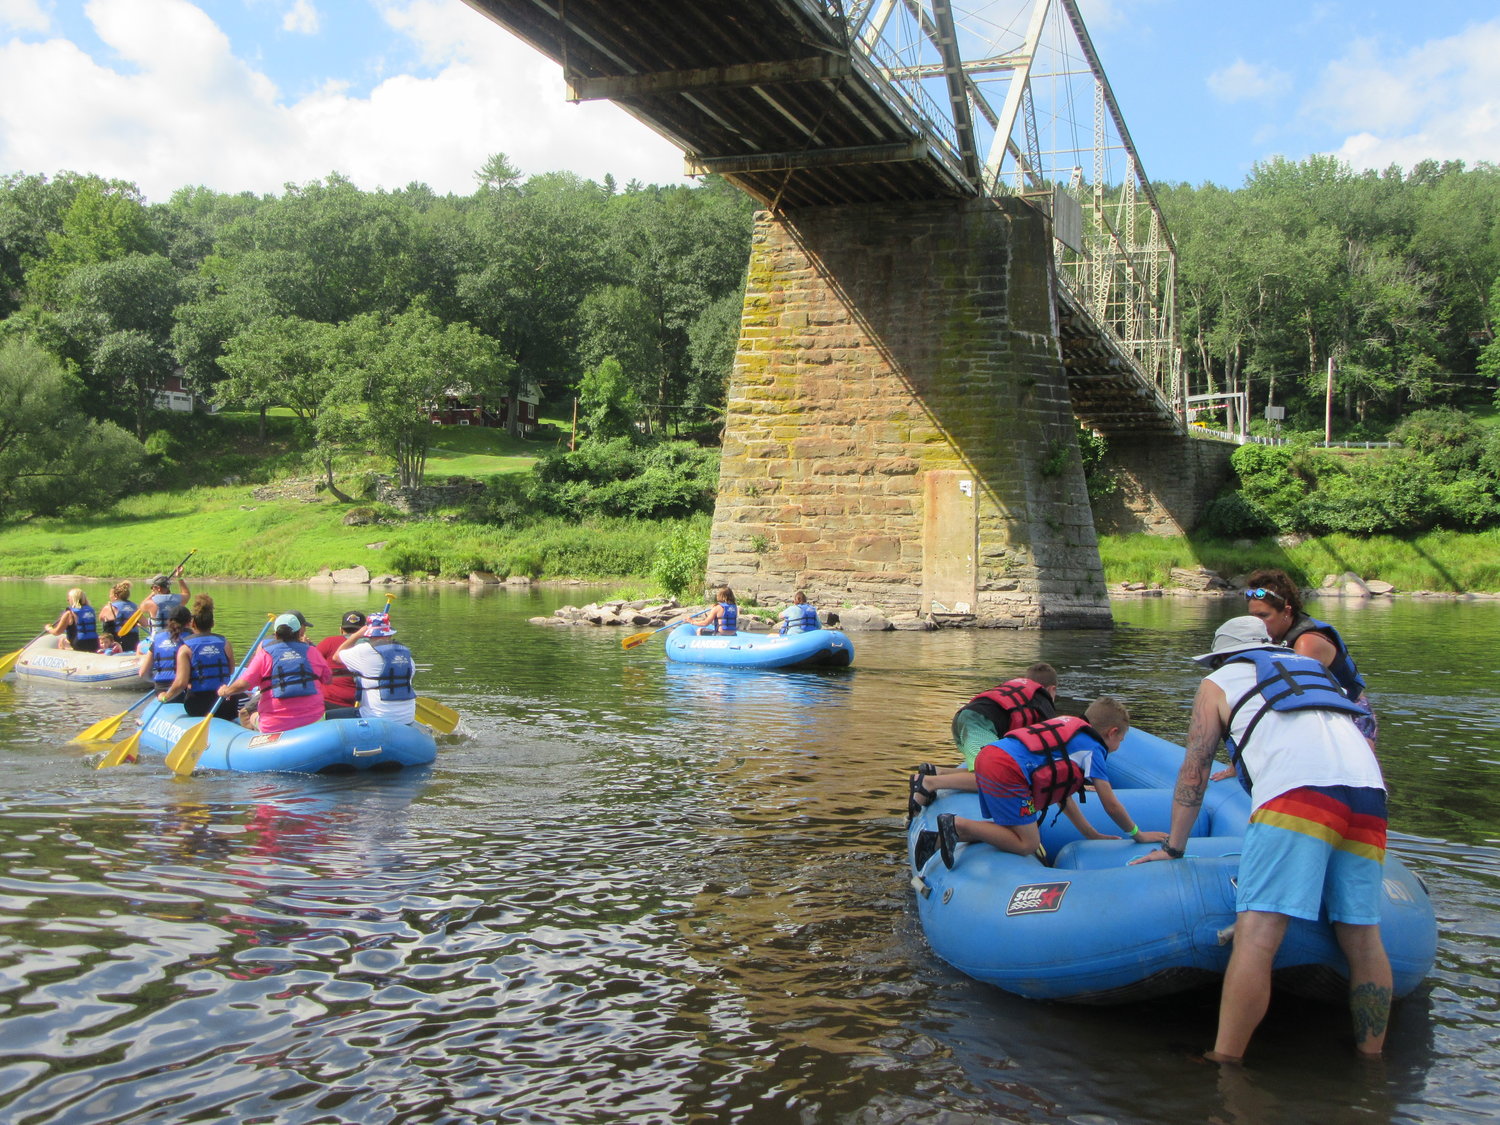 Participants in the Upper Delaware Council’s 34th annual family raft trip launch beneath the Skinners Falls-Milanville Bridge for their August 7 paddle to Lander’s Narrowsburg base.